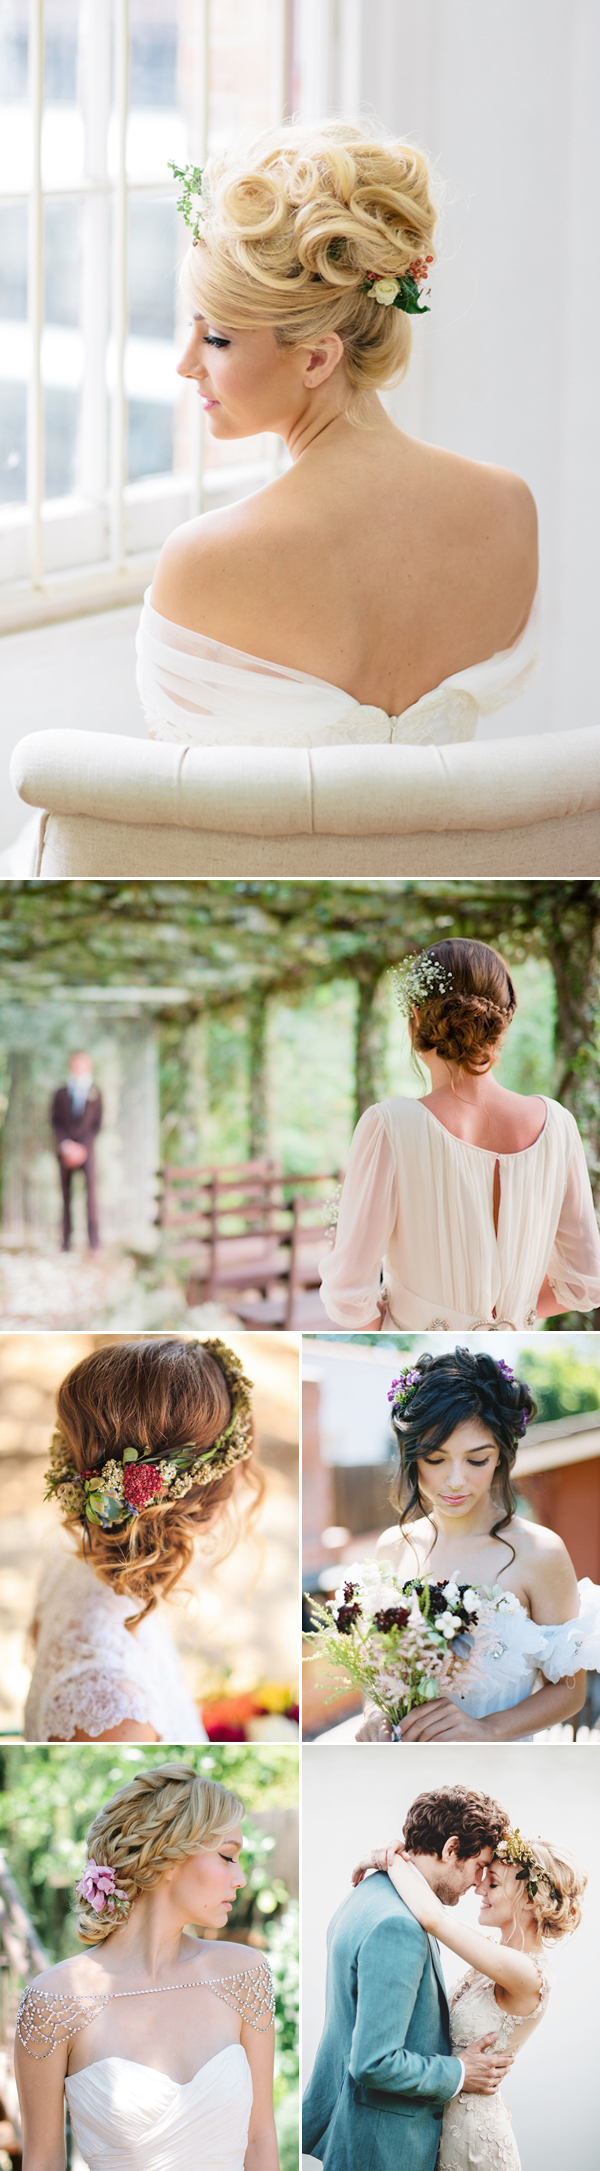 Natural & Down to earth updo wedding hairstyles